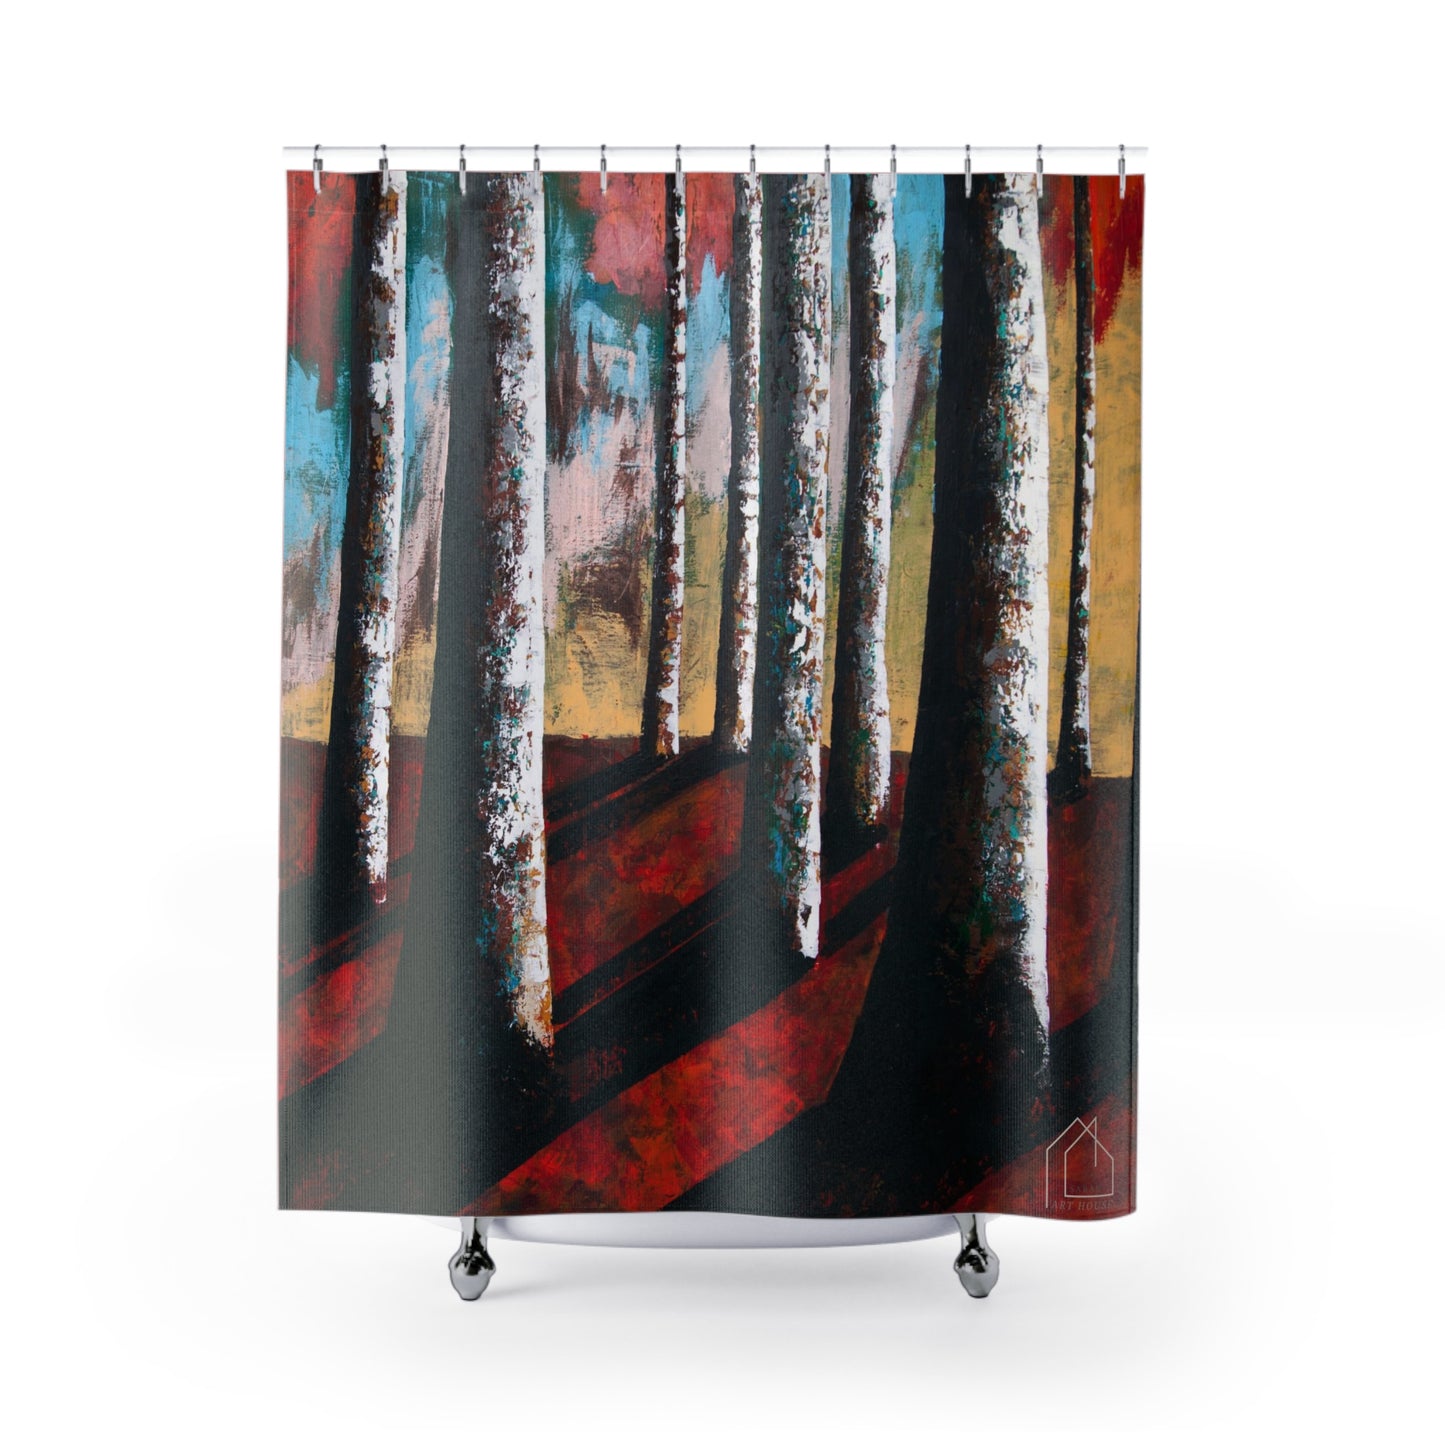 At the end of the day - Shower Curtain - Curtain for Bath